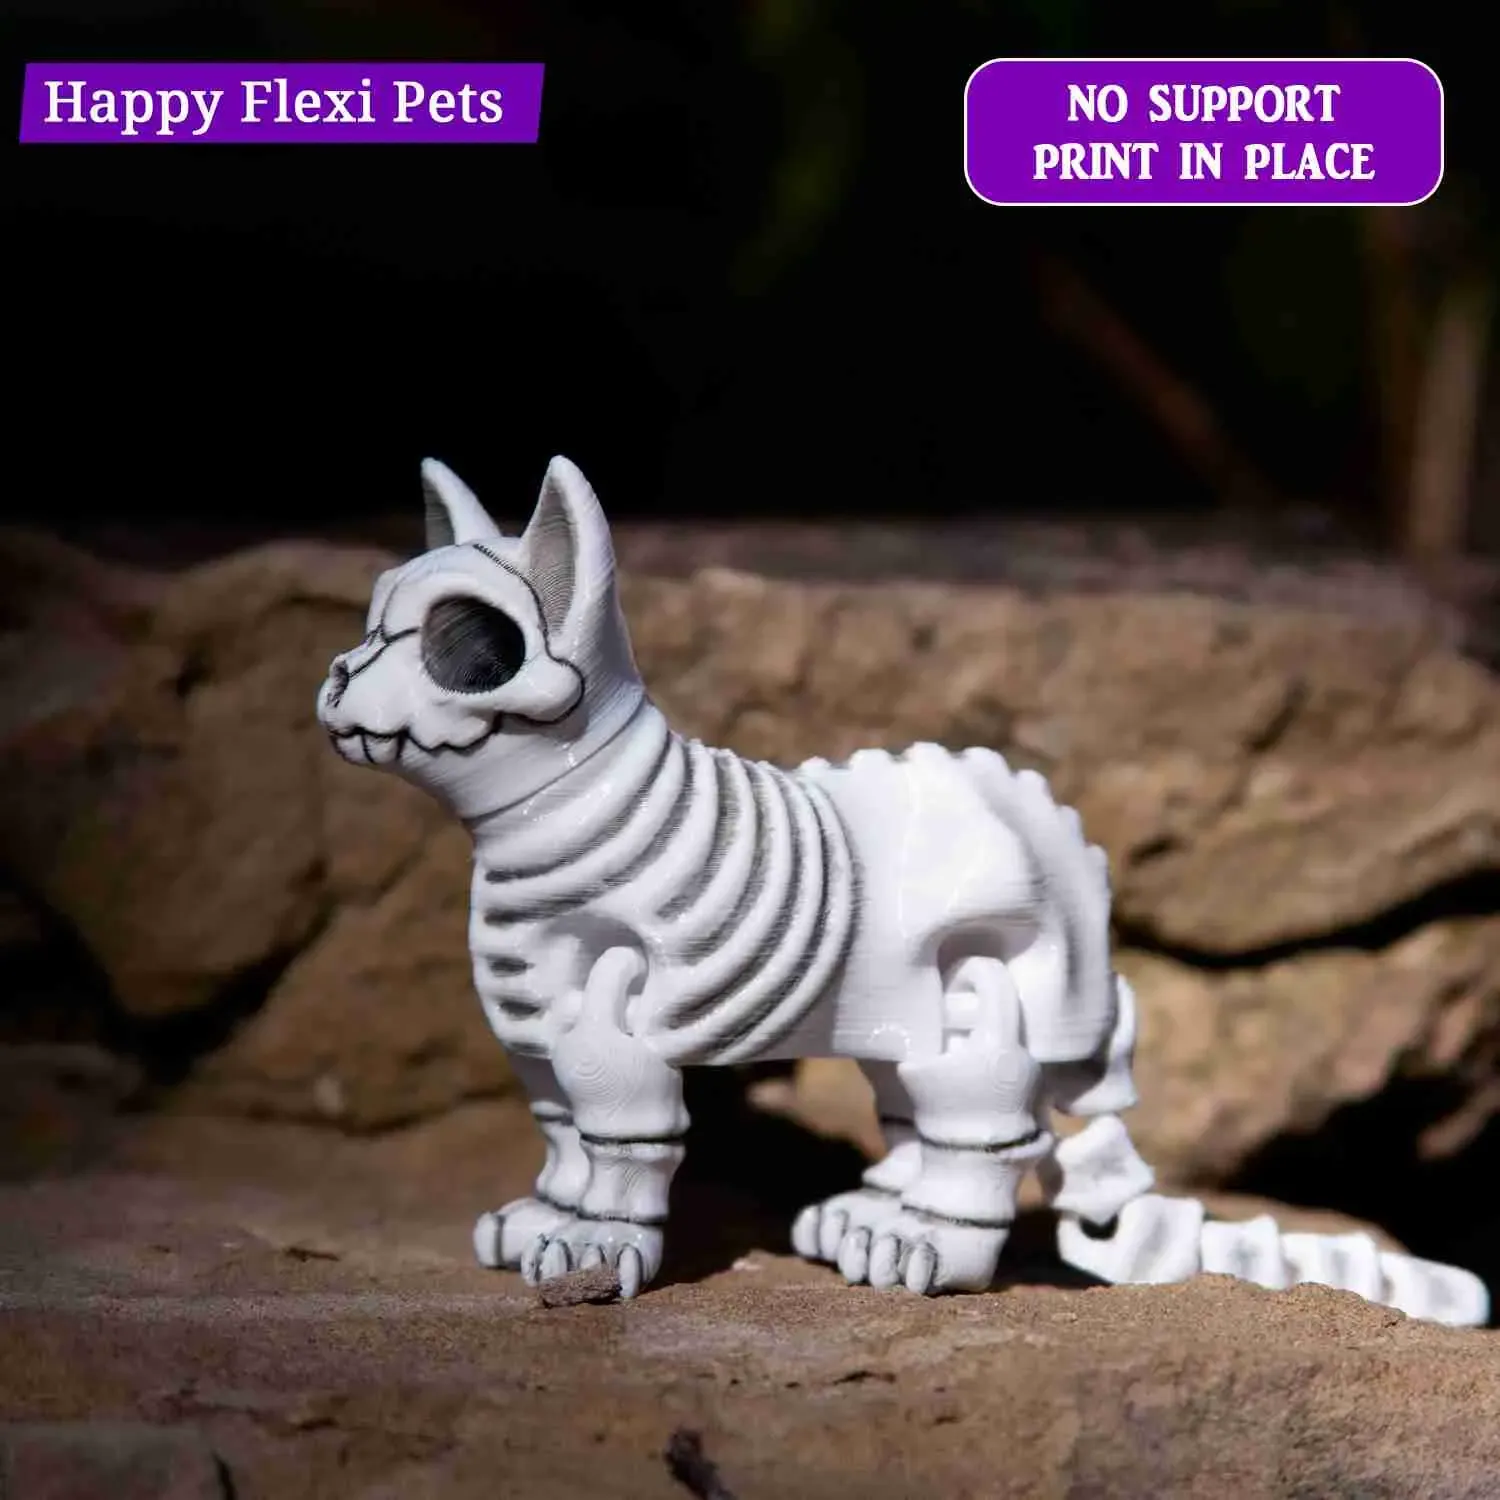 Skeleton cat articulated toy